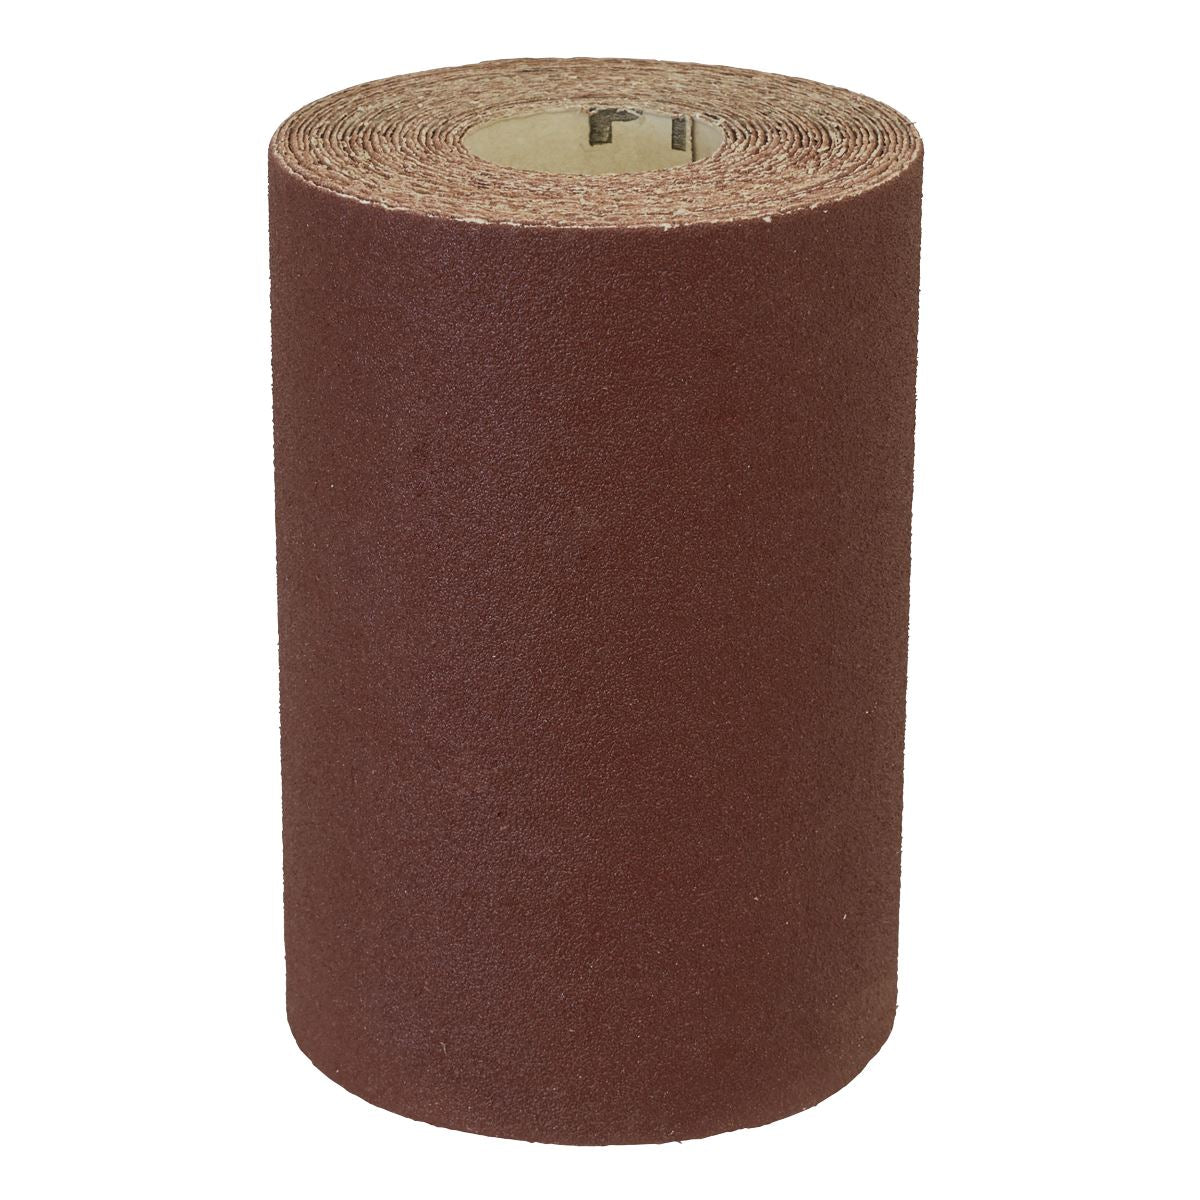 Worksafe by Sealey Production Sanding Roll 115mm x 5m - Fine 120Grit